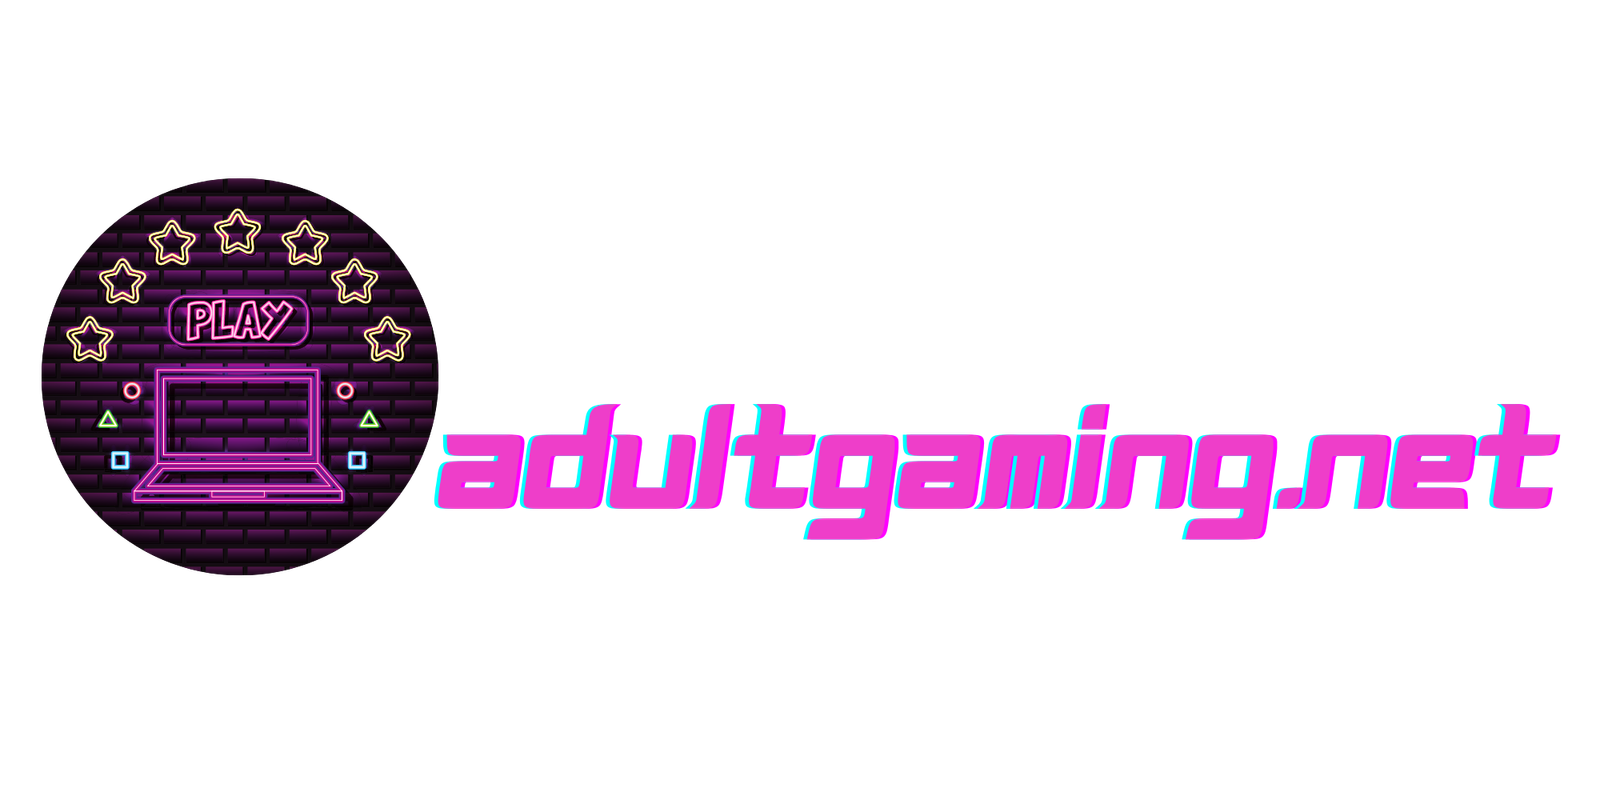 AdultGaming.net